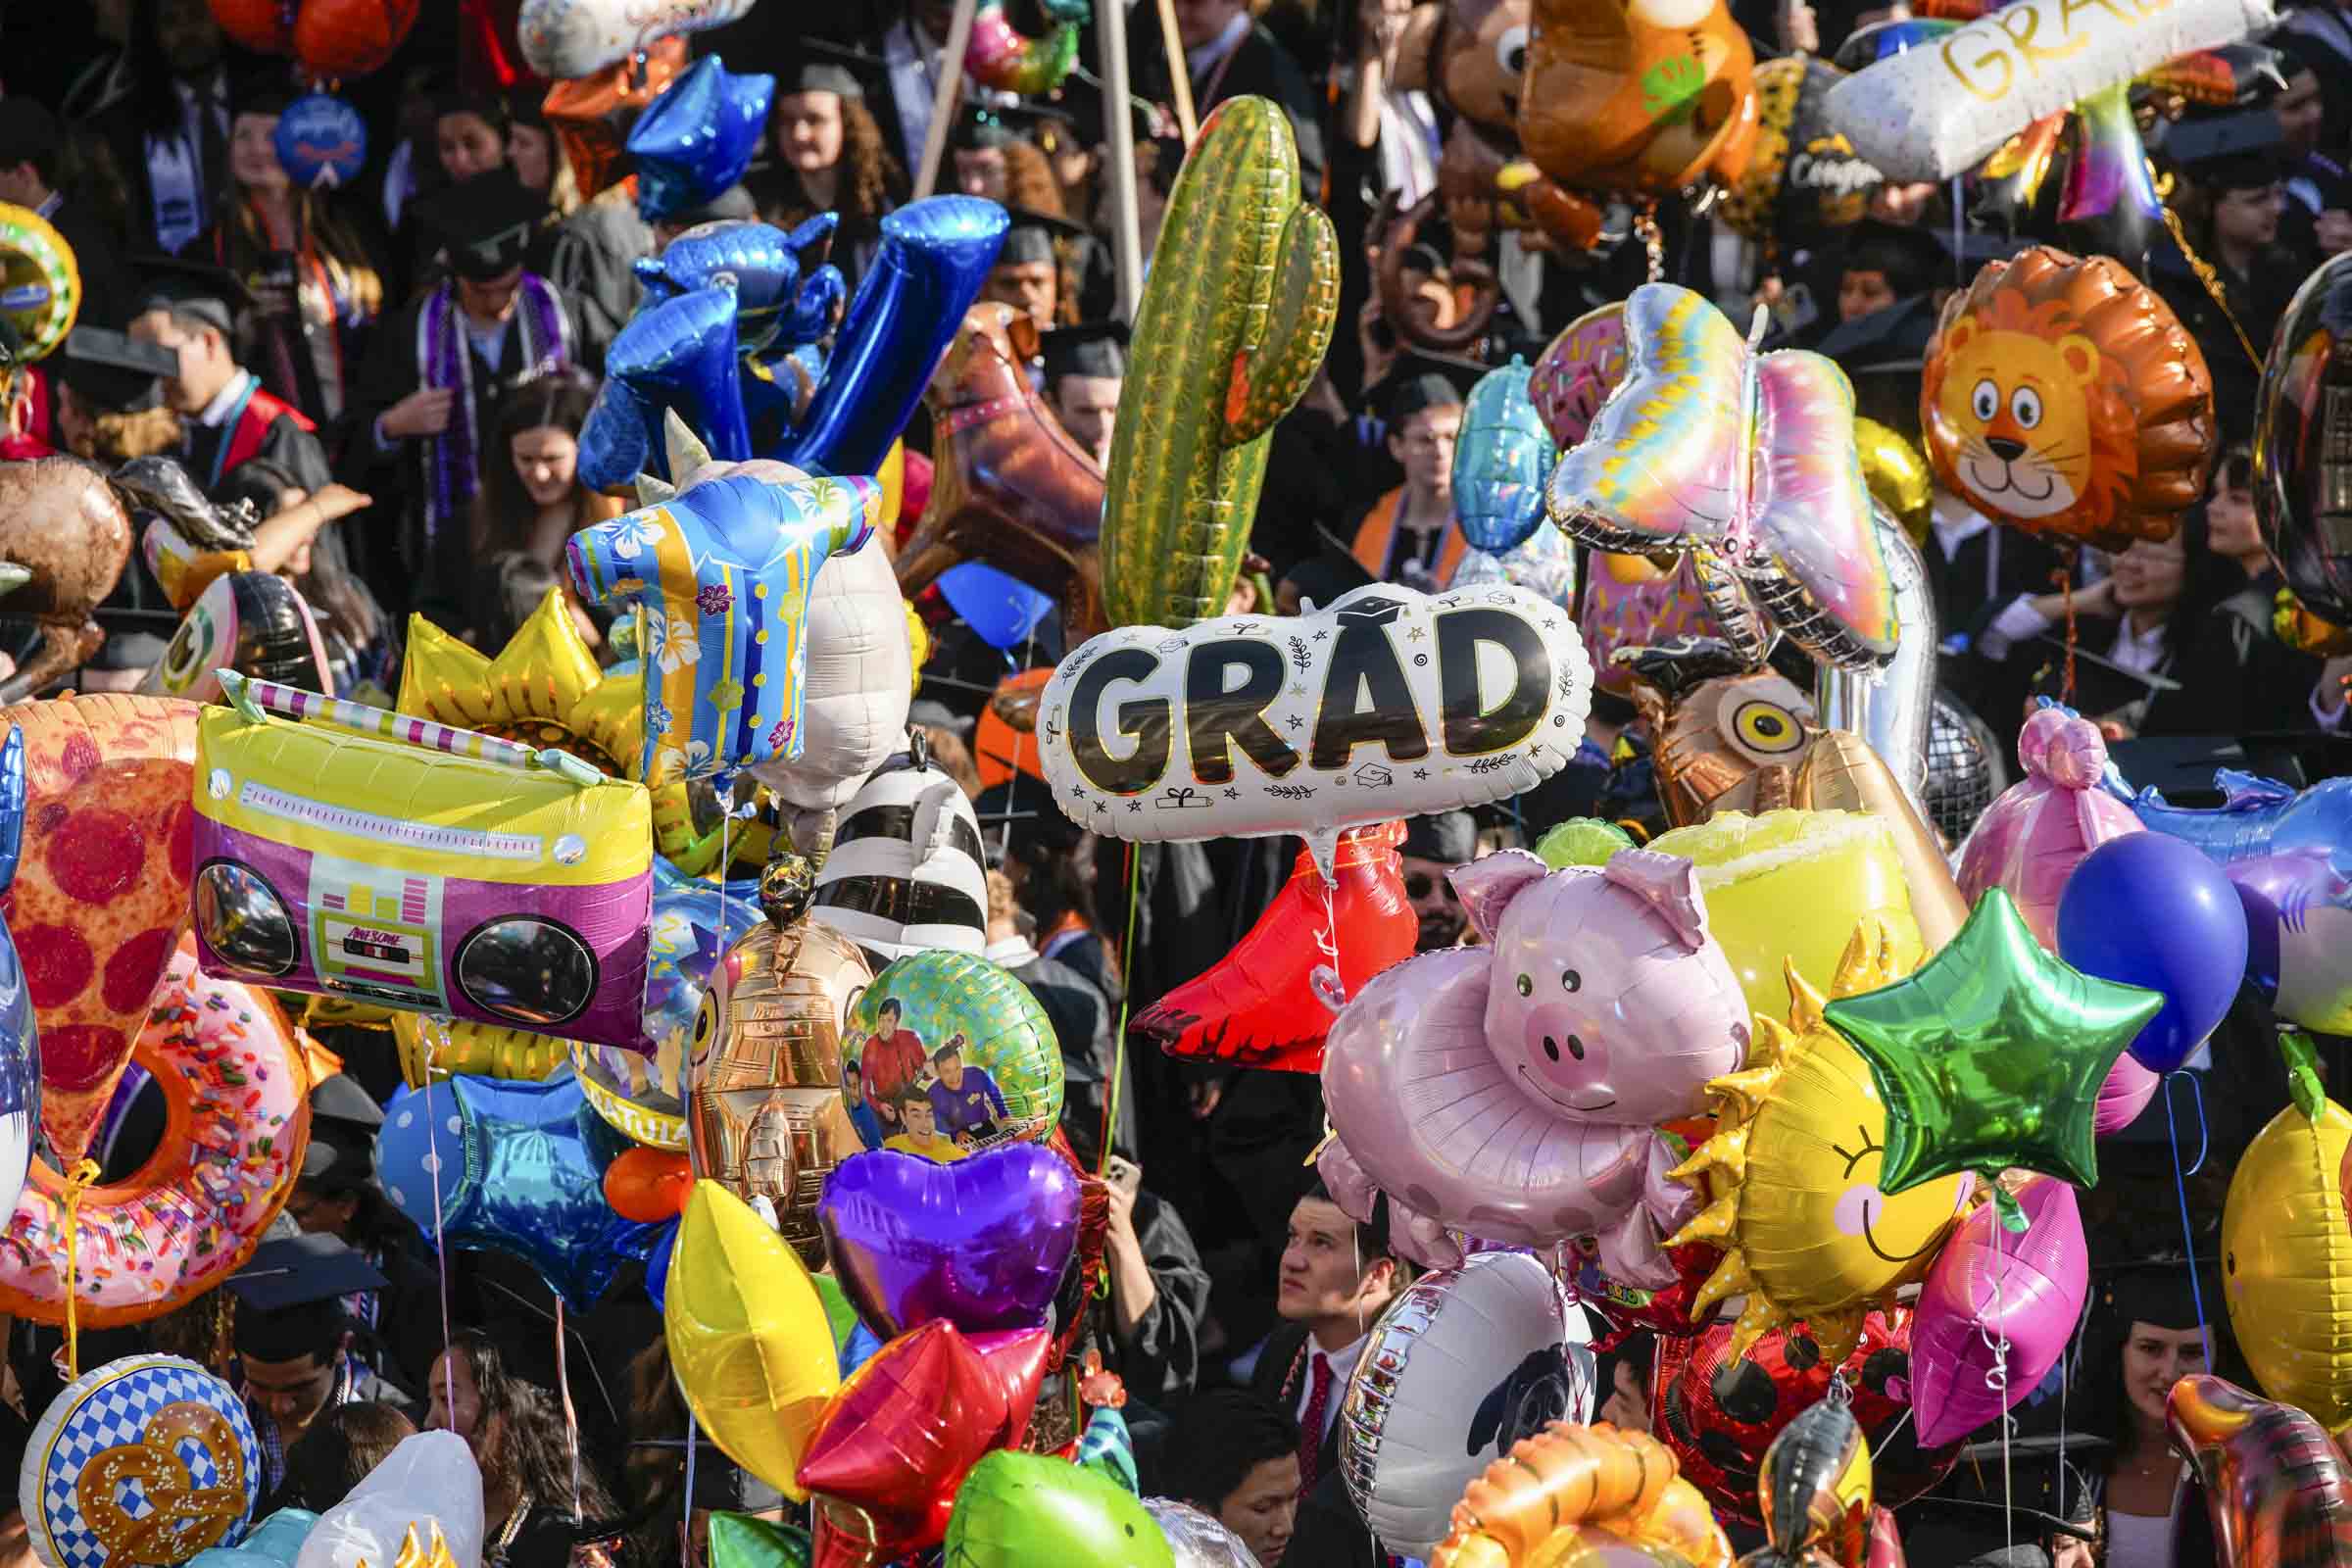 A full view of graduation balloons